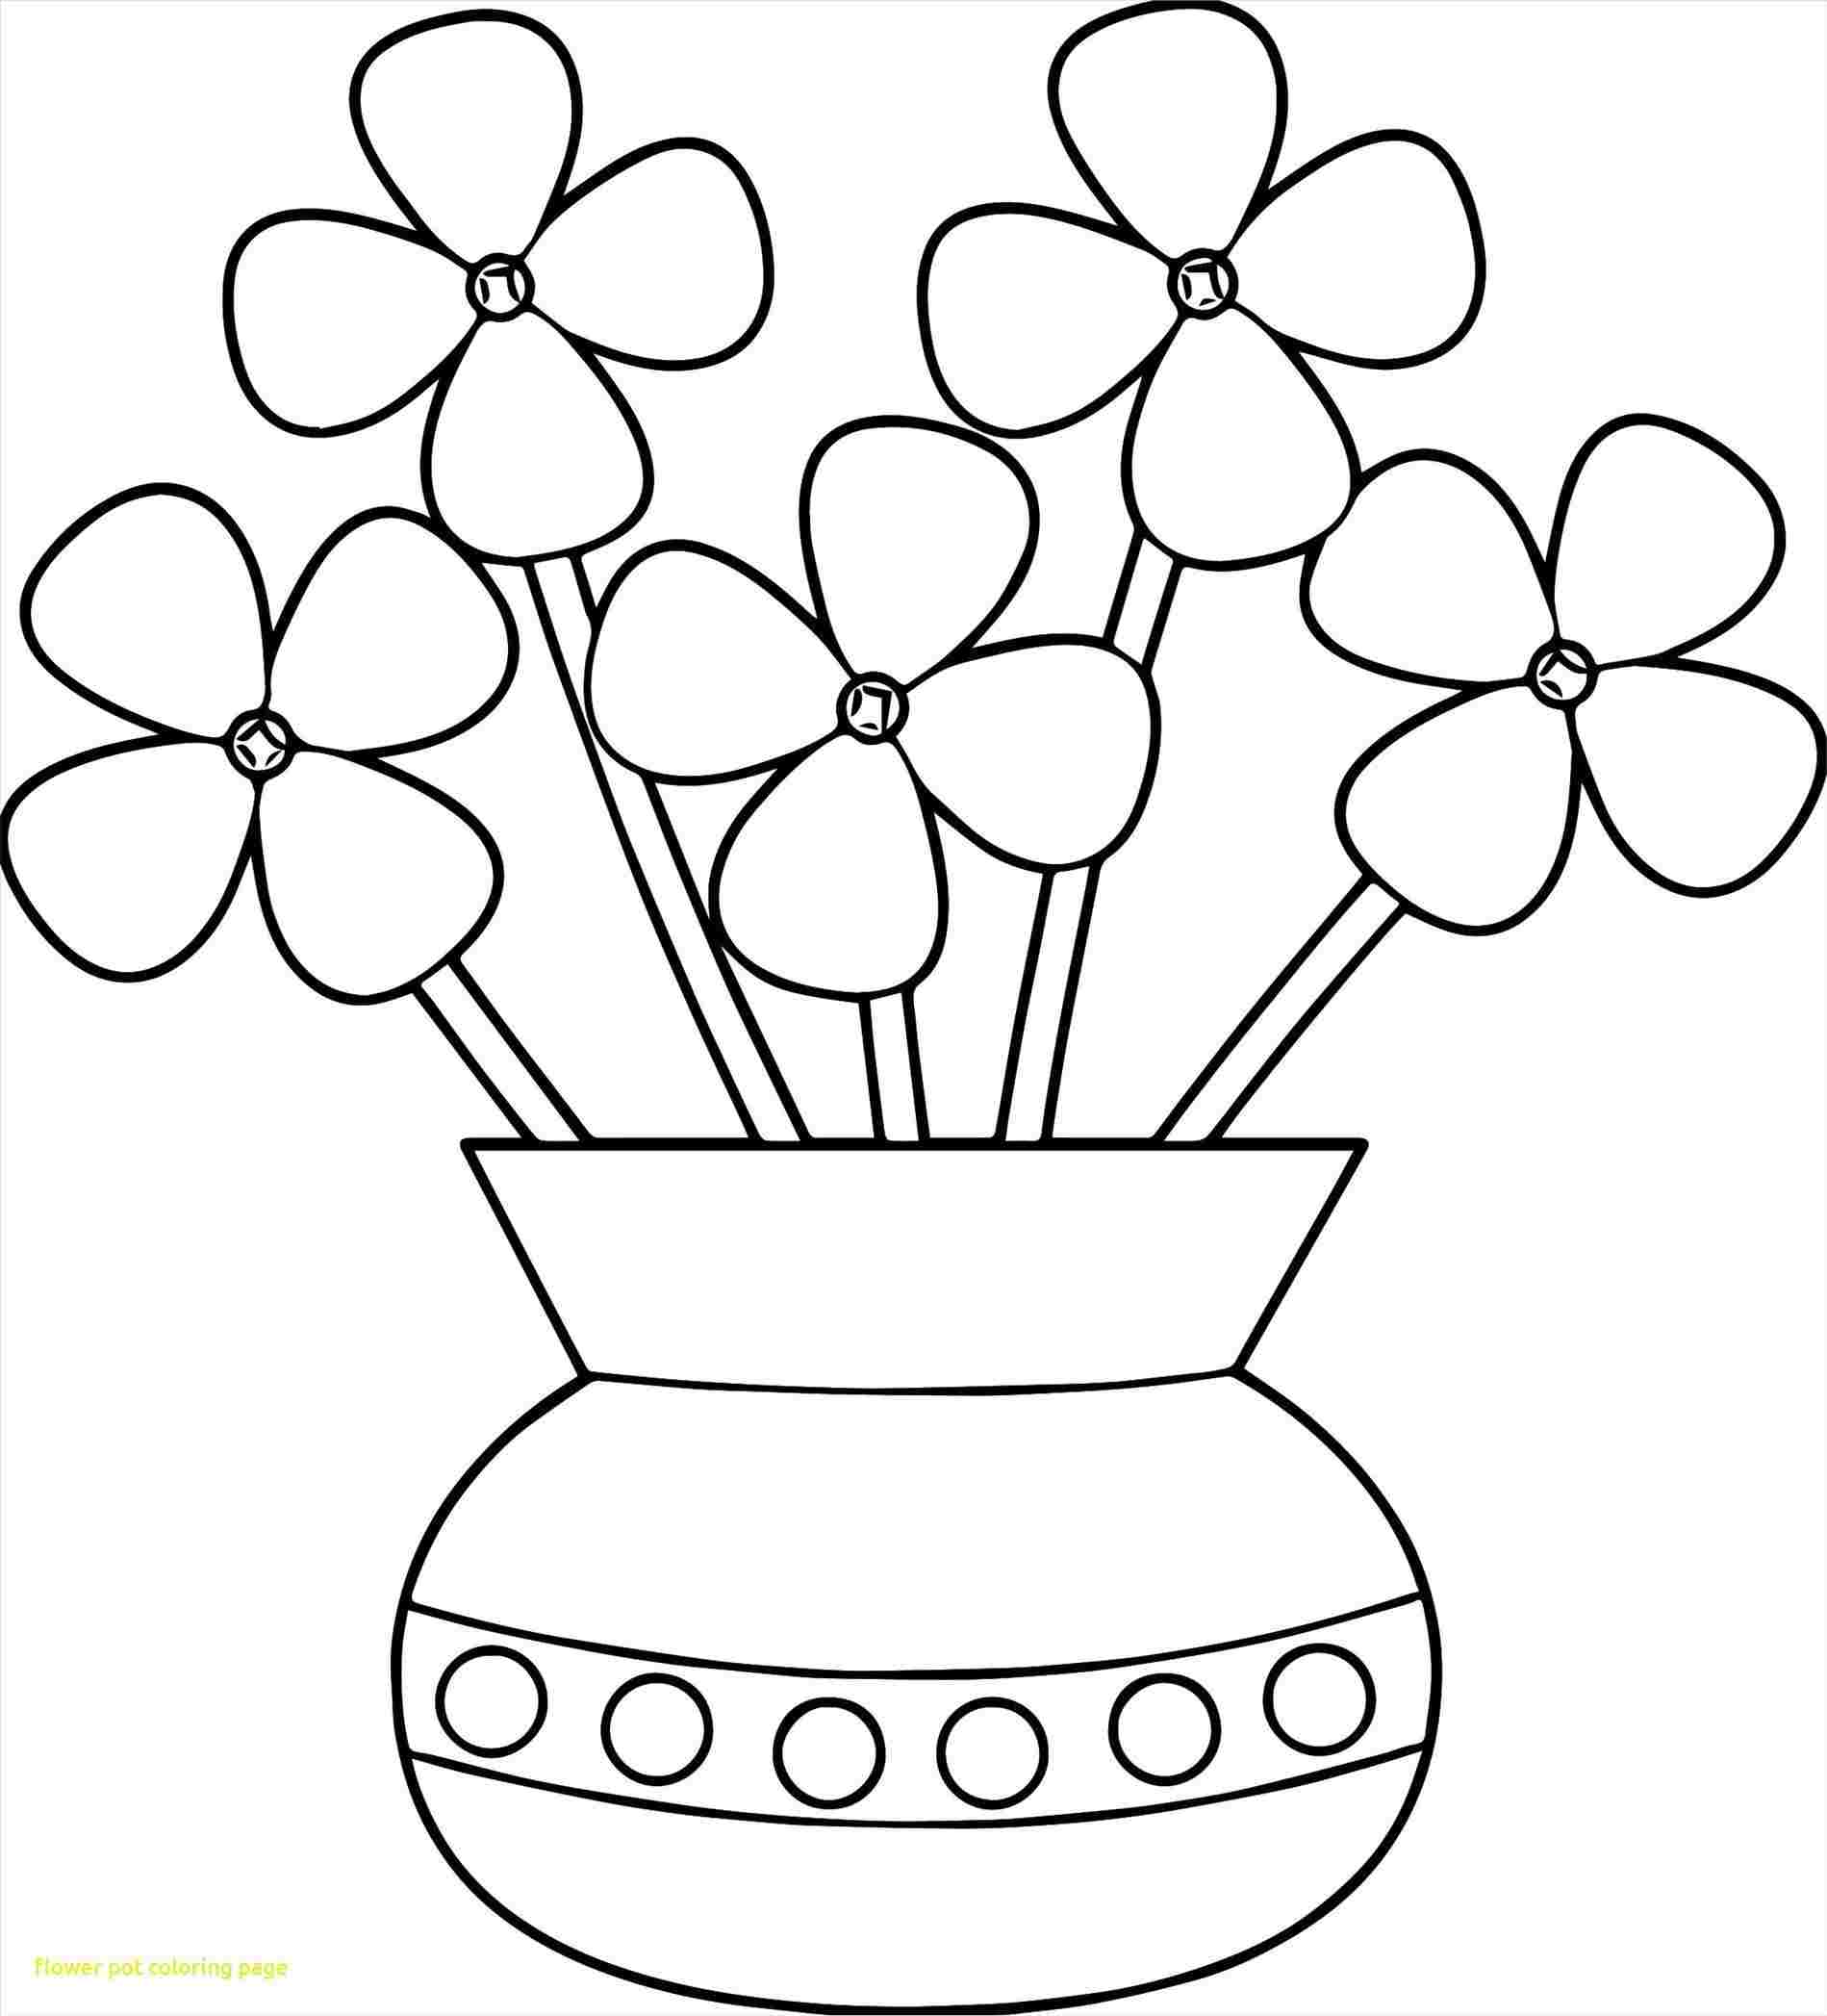 How To Draw A Easy Flower Pot | Best Flower Site